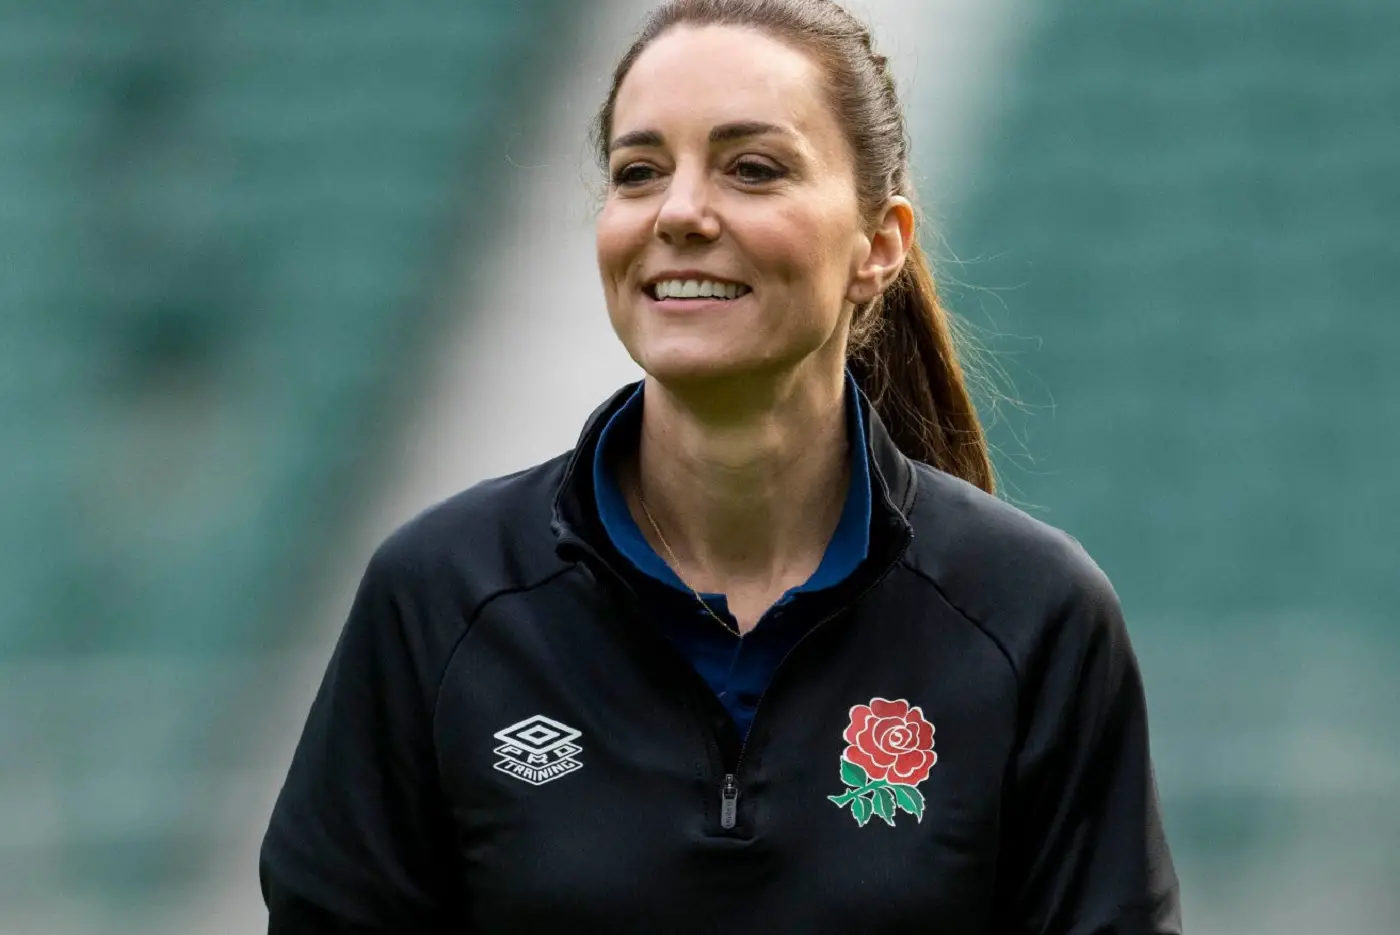 The Duchess of Cambridge became the patron of Rugby Union